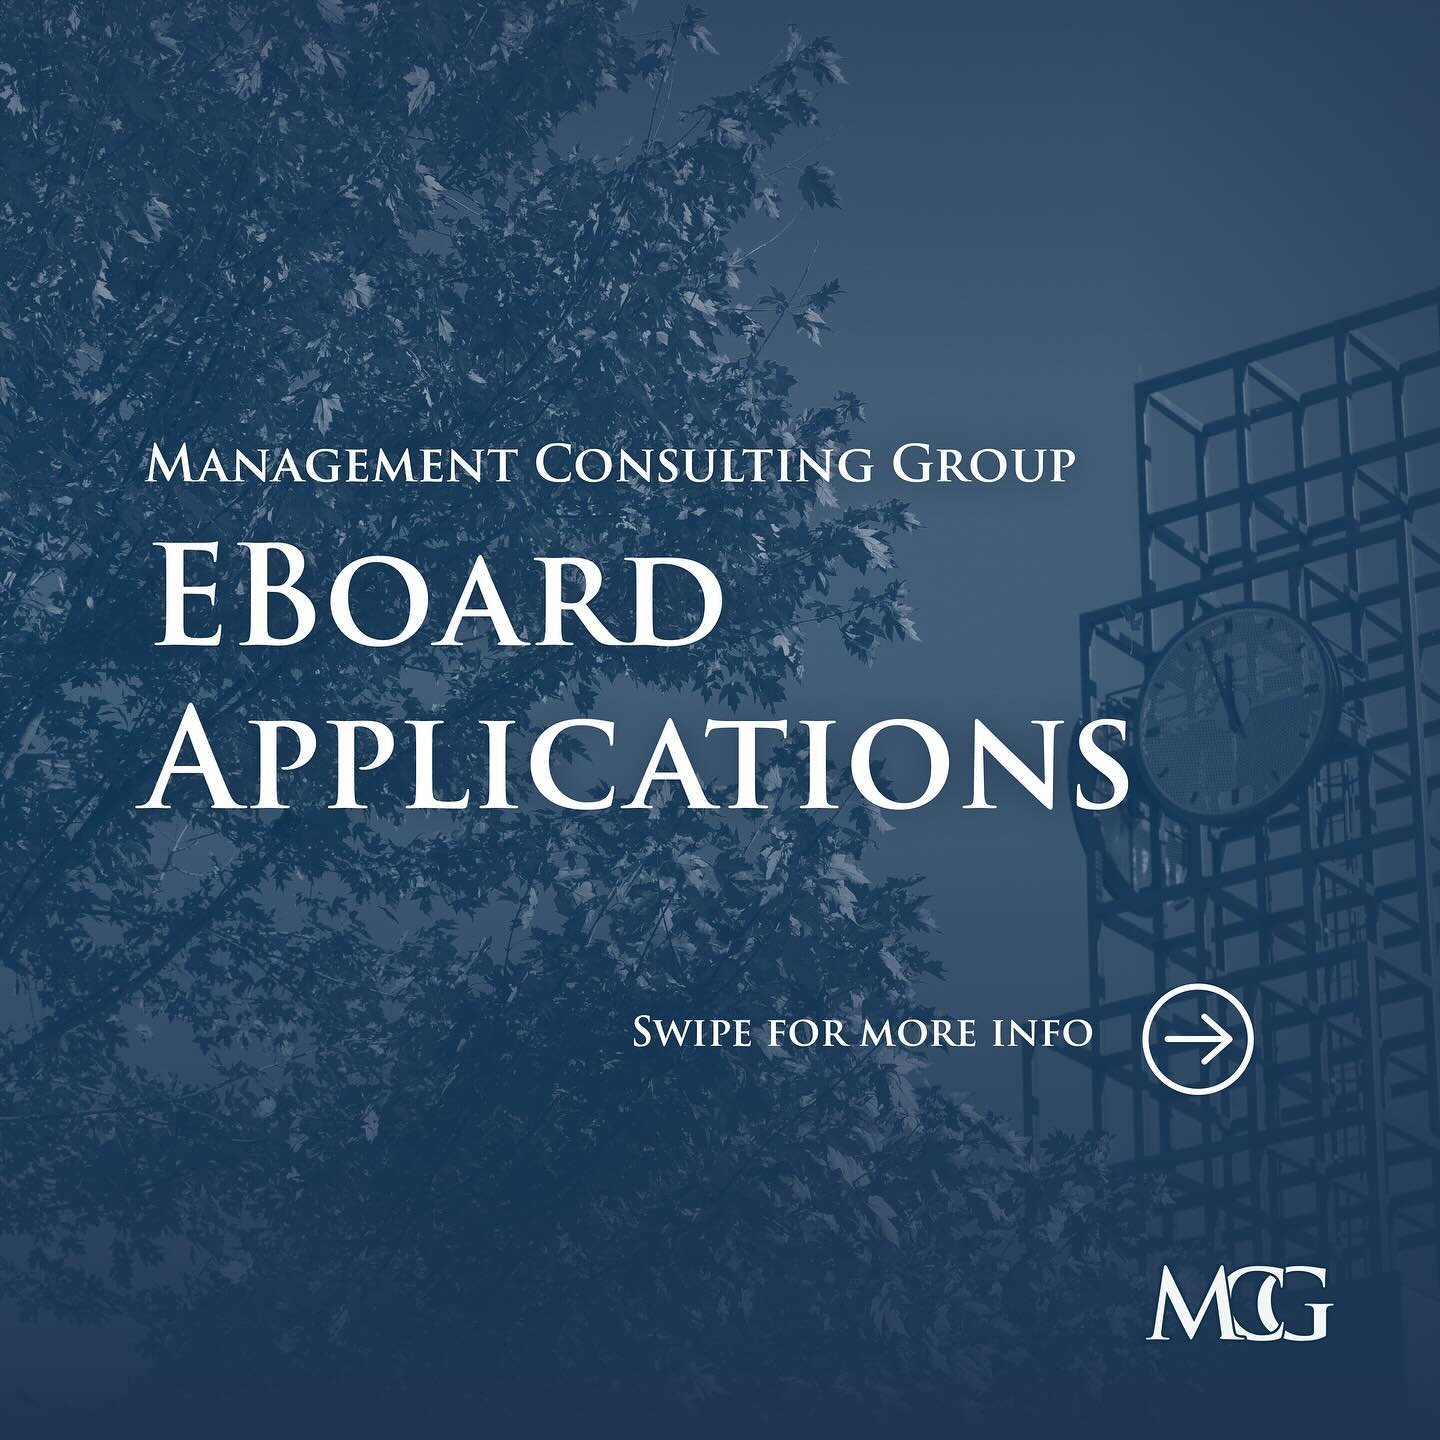 The Management Consulting Group is now accepting applications for their Executive Board committees. 

To explain what each committee does in detail and field any questions, we will be hosting a General Interest Meeting on Monday, April 8th at 8:00pm 